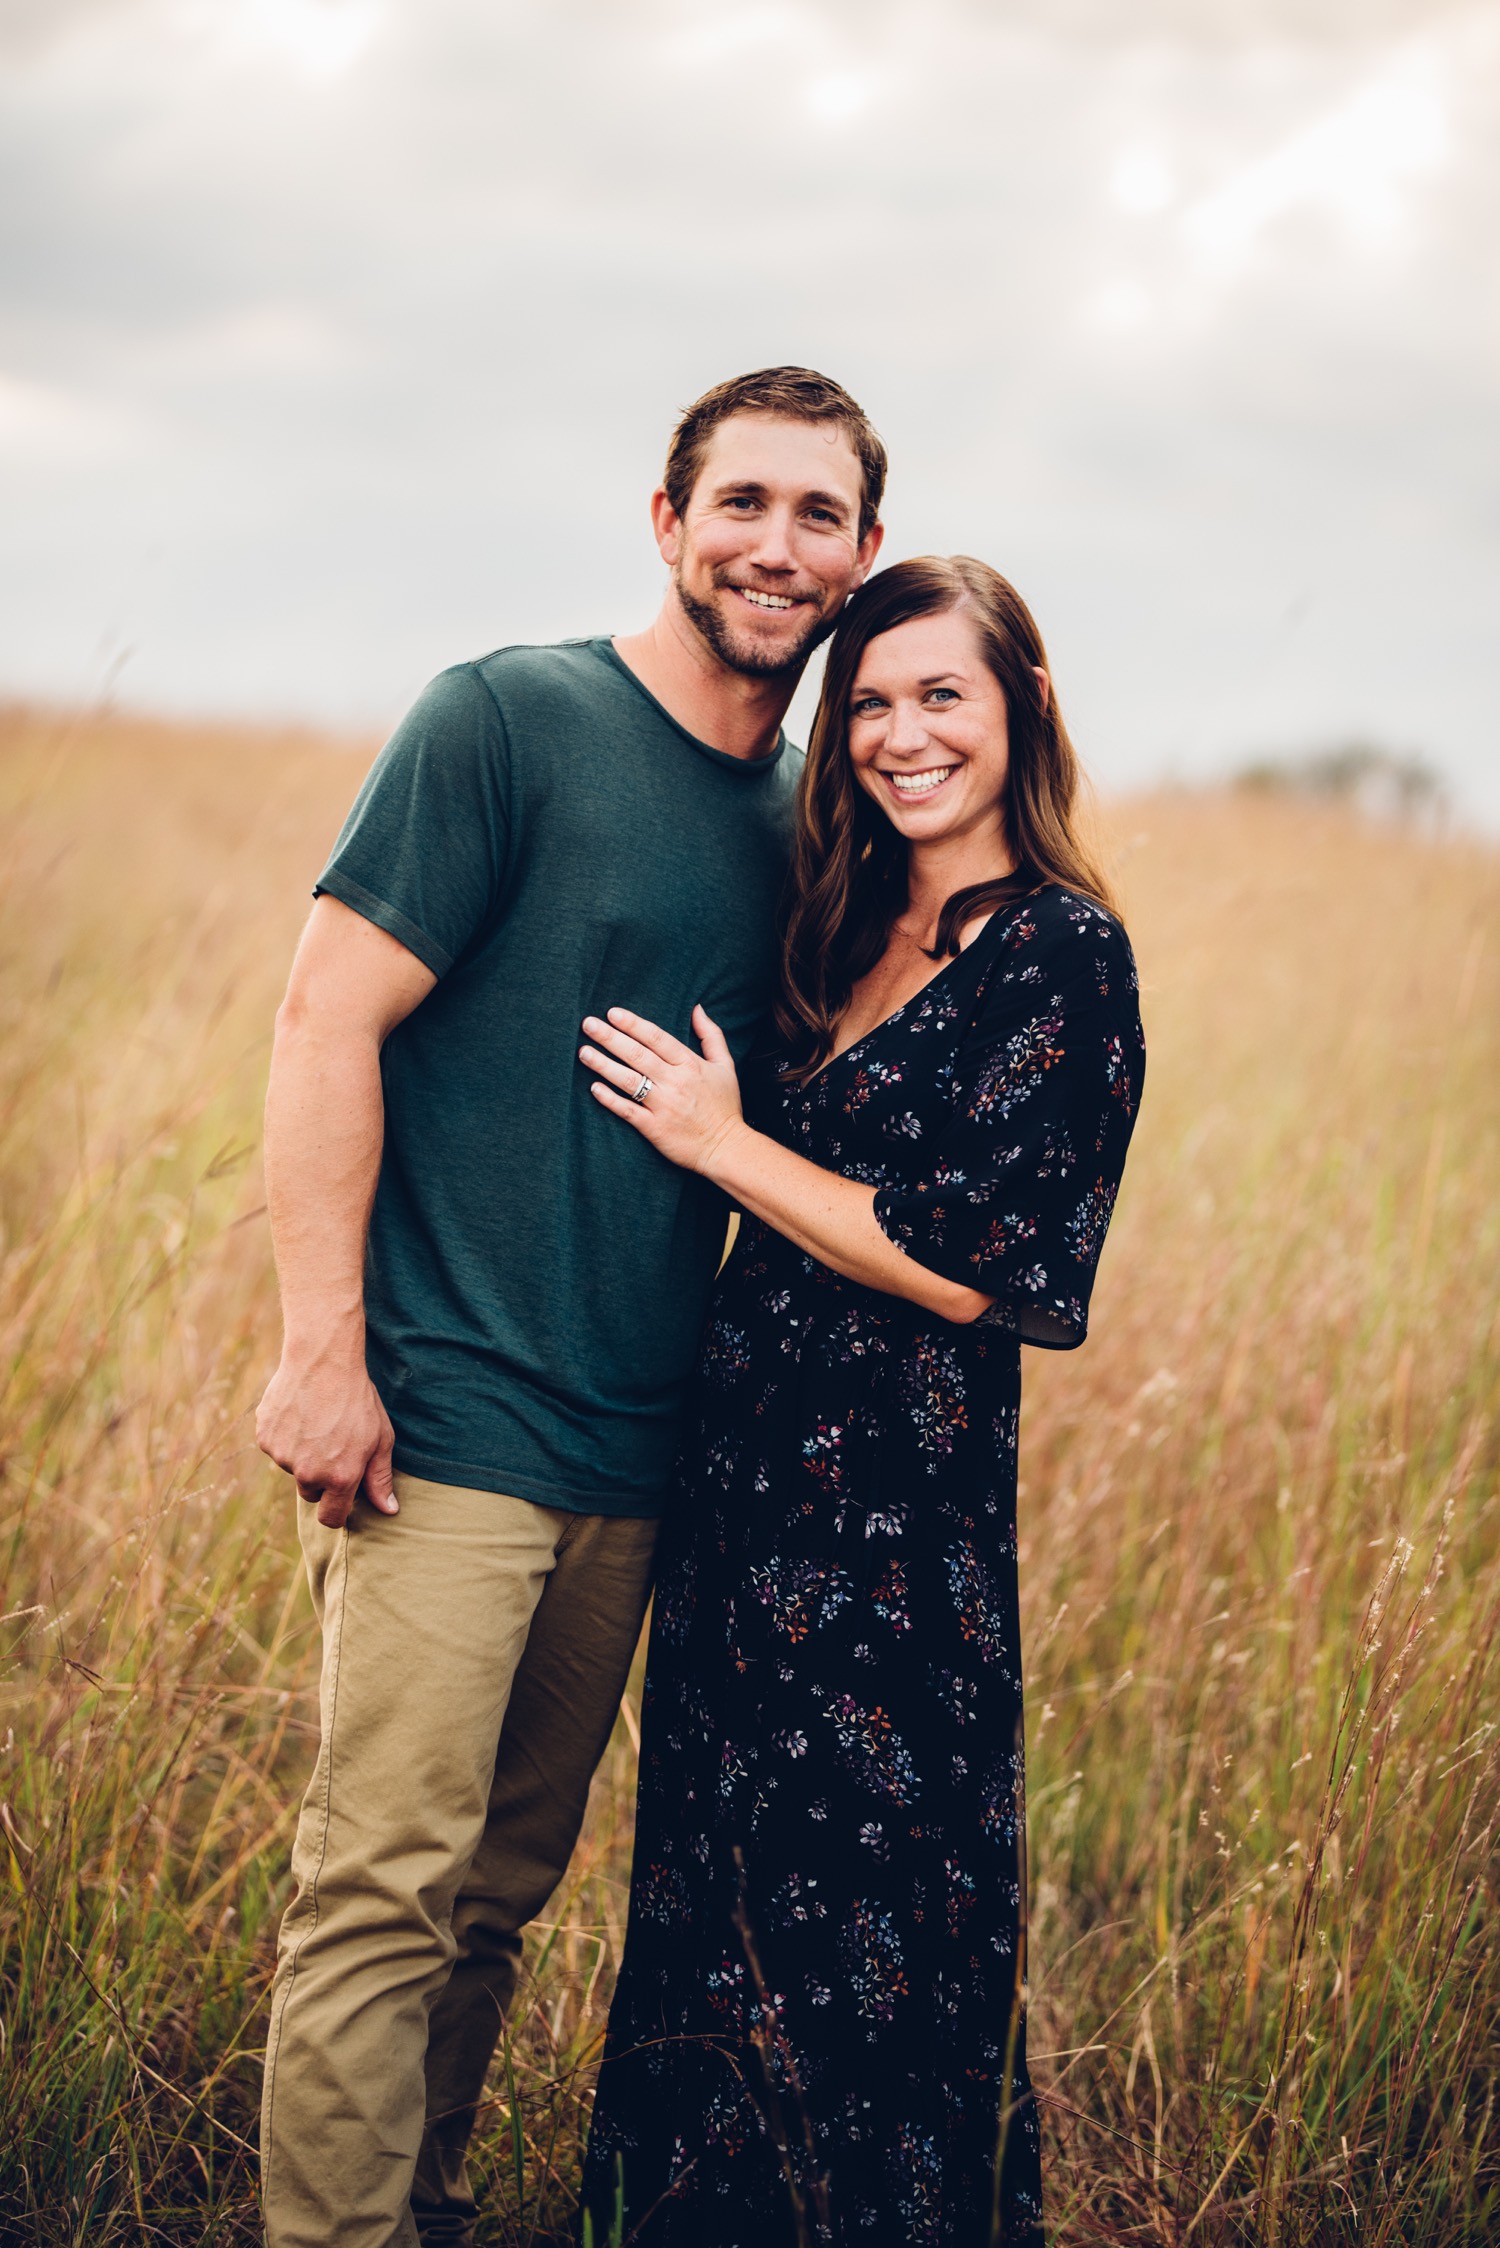 Minnesota couple poses during their central minnesota family photography session